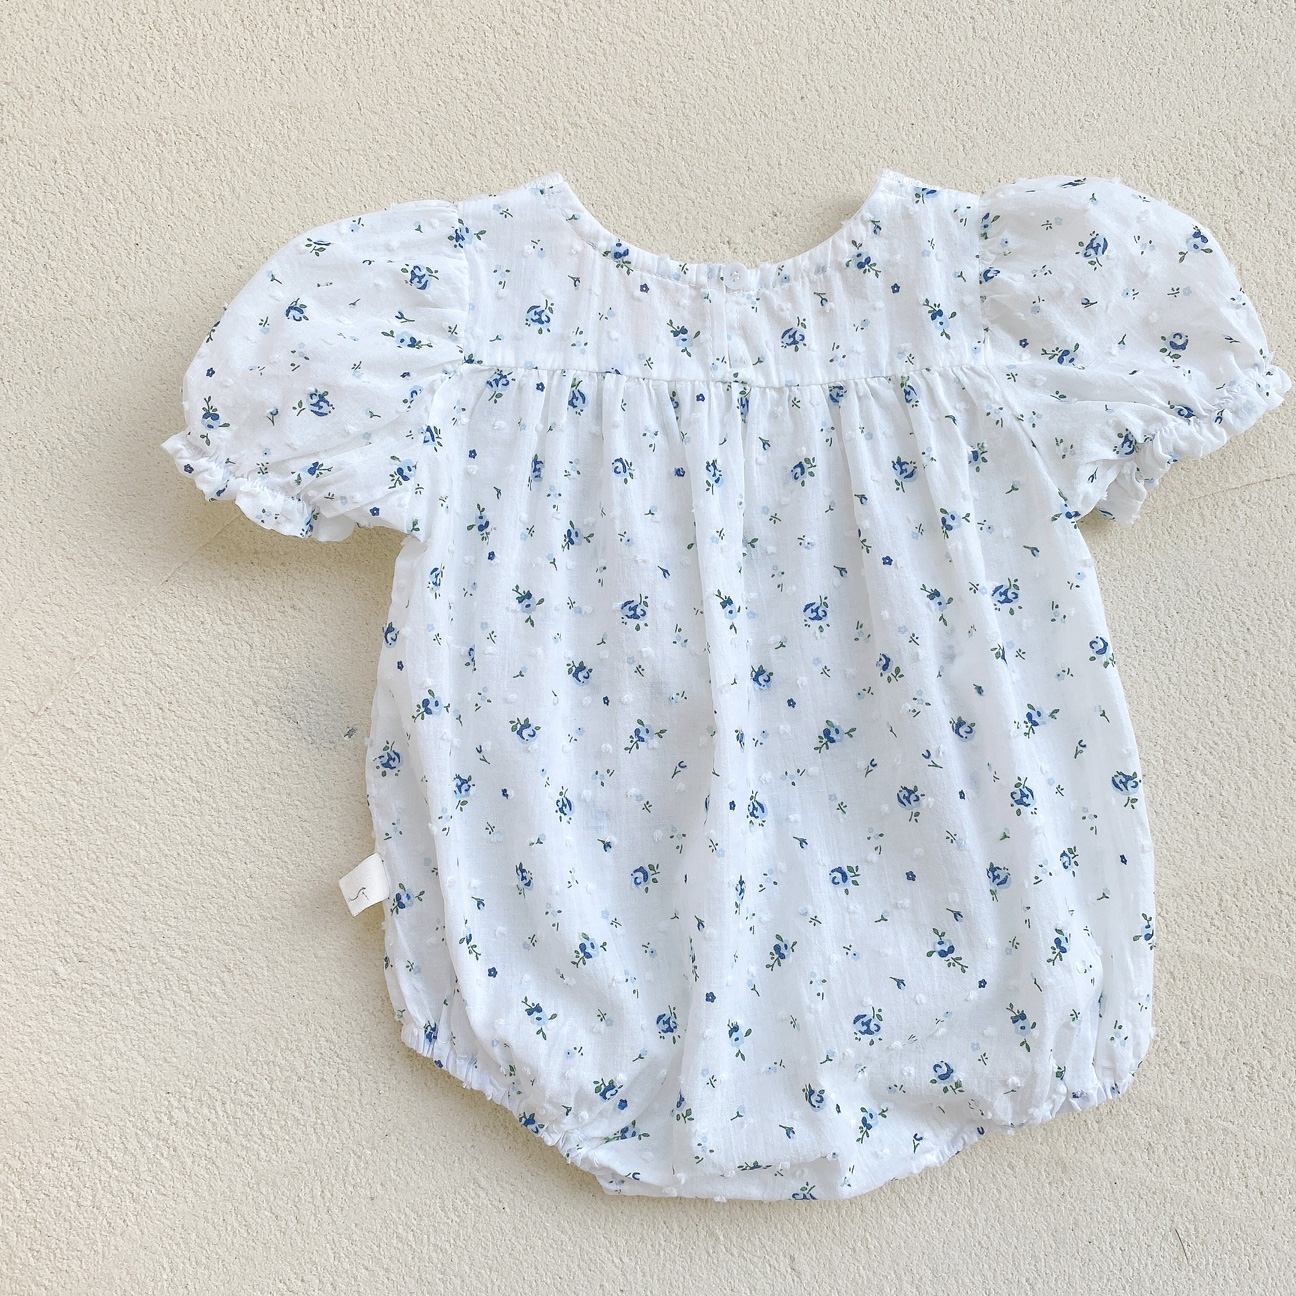 Children's Clothing, Baby Clothing, Baby Summer Clothing, One-Piece Clothing, Baby Lace, Small Floral Romper, Bag Fart Romper, Thin Section Wholesale Baby Clothes